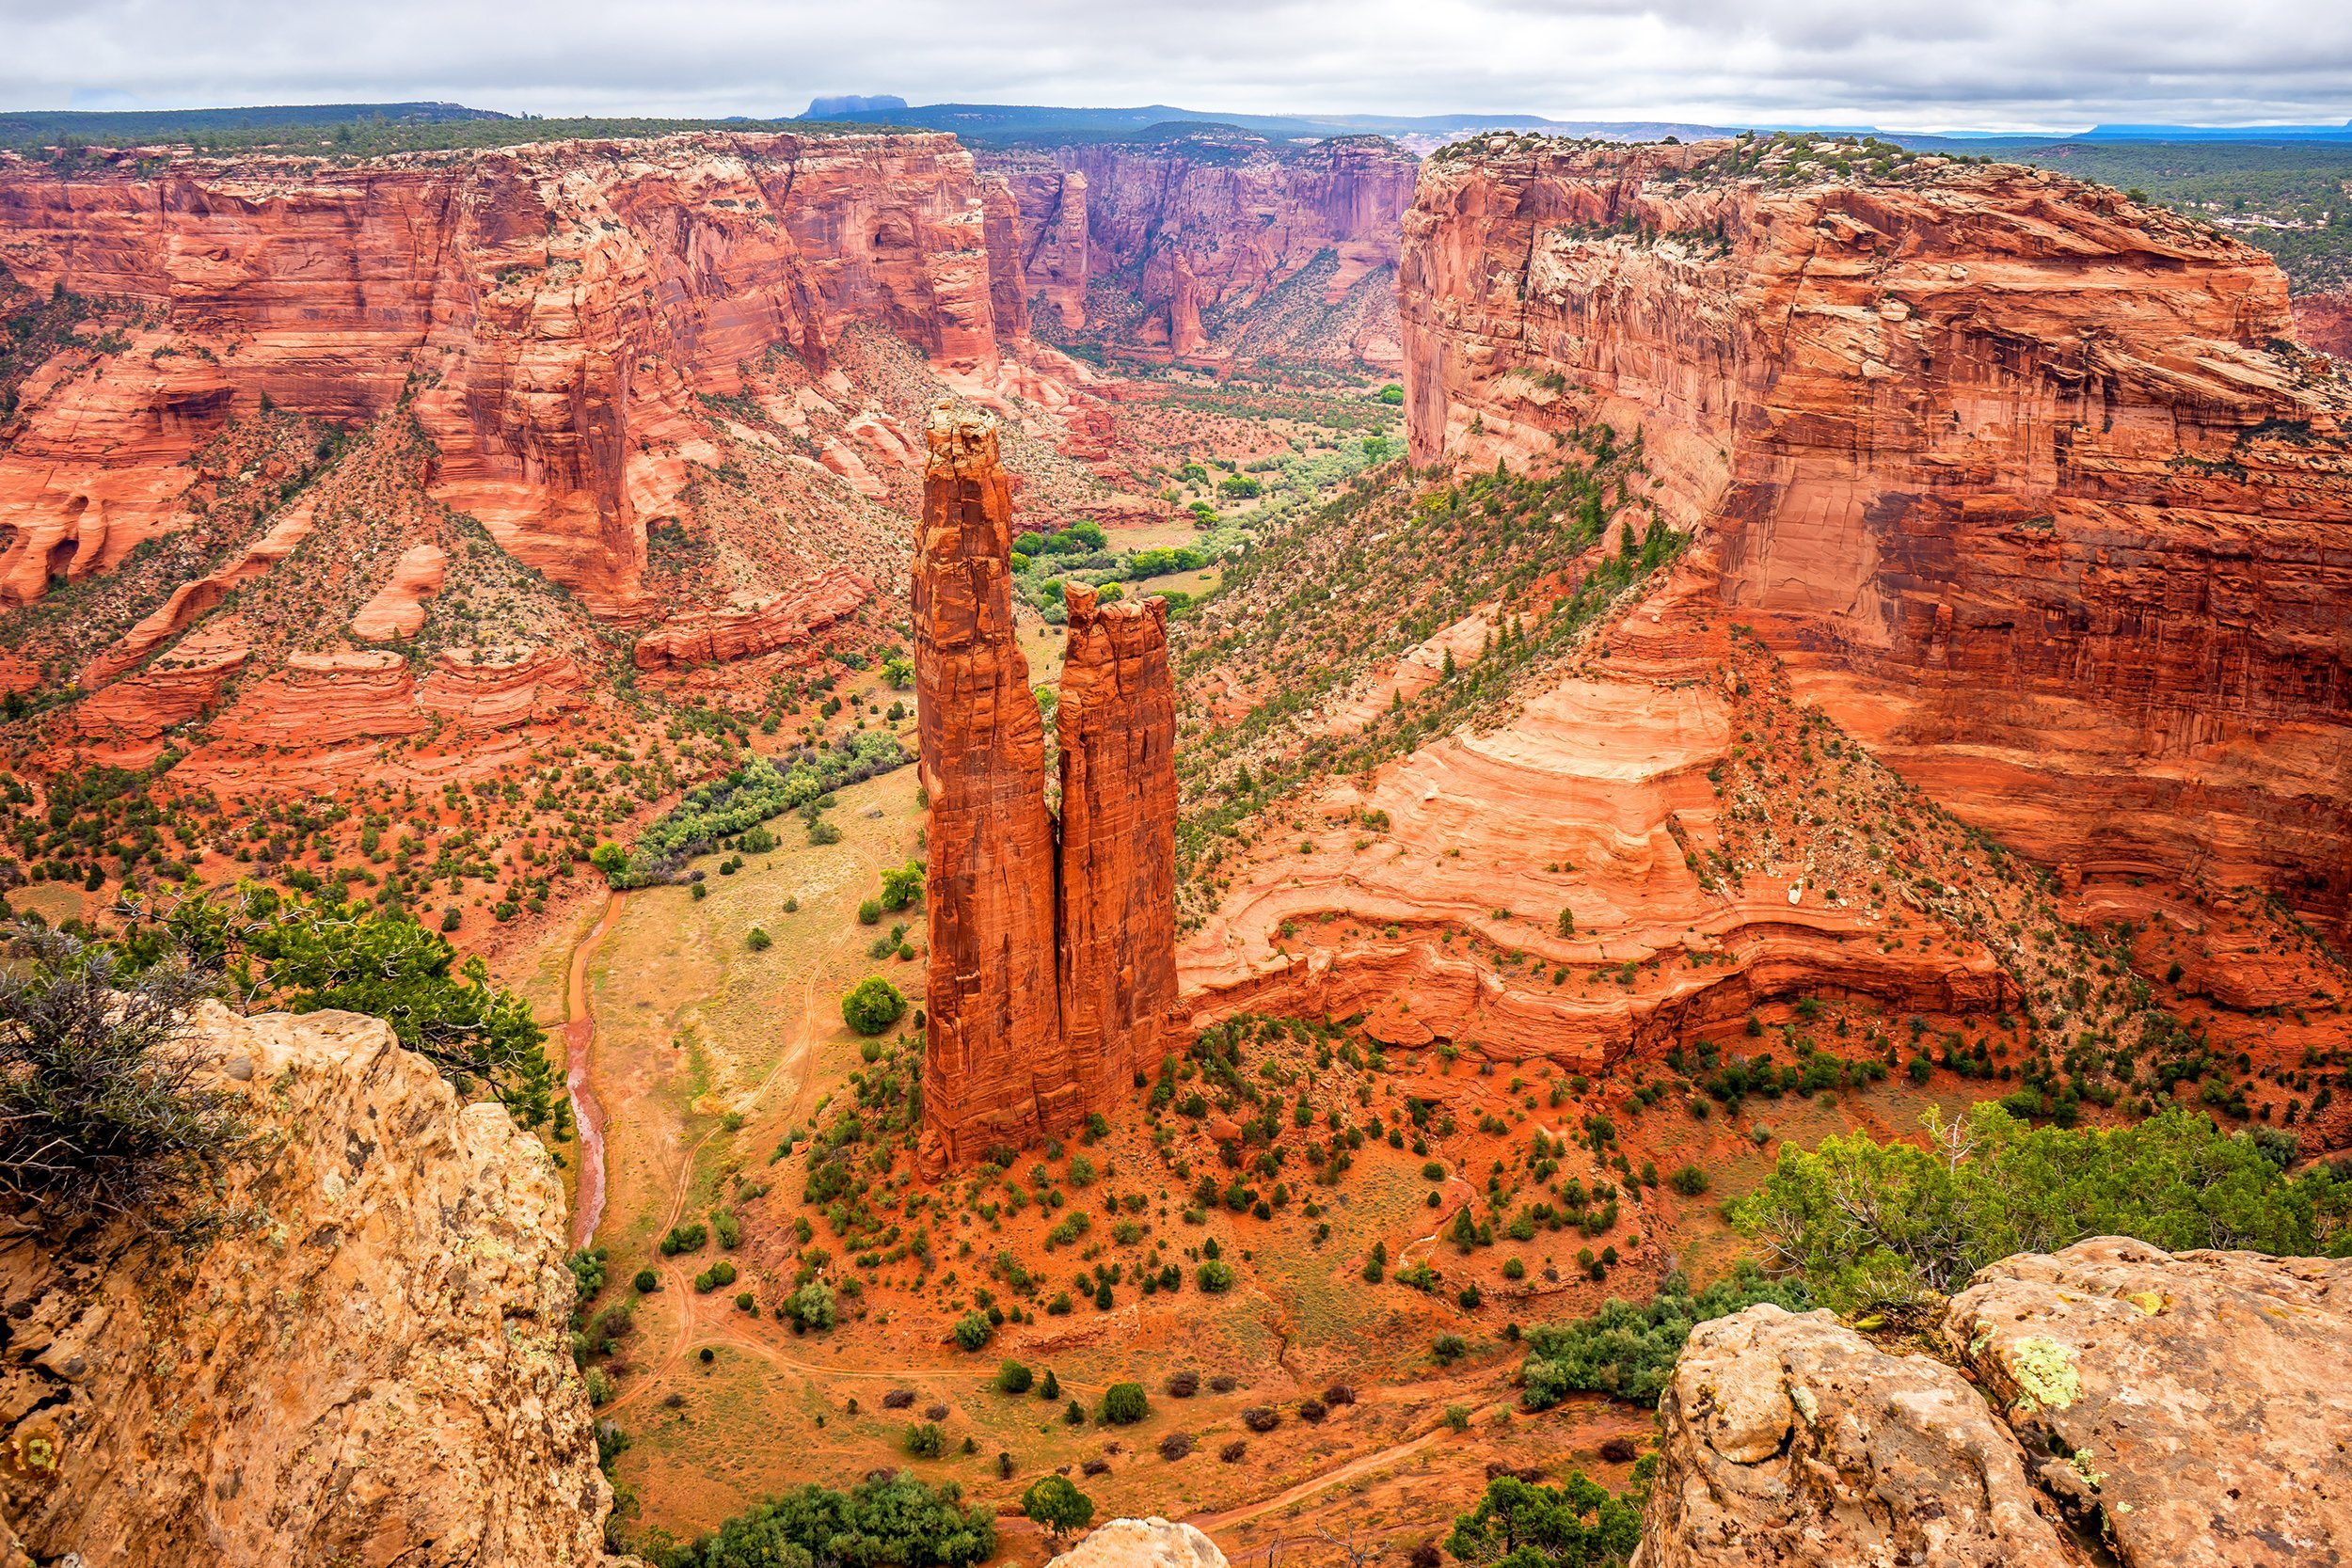 <p>Canyon de Chelly is less visited than Mesa Verde, but equally stunning — photographer Ansel Adams took some iconic images there. You can take a tour of the canyon with Navajo guides, Schreve says, and there's no entrance fee.</p><p> <a href="https://blog.cheapism.com/american-west-photos/">30 Stunning Photos of Iconic Landscapes in the American West</a></p>